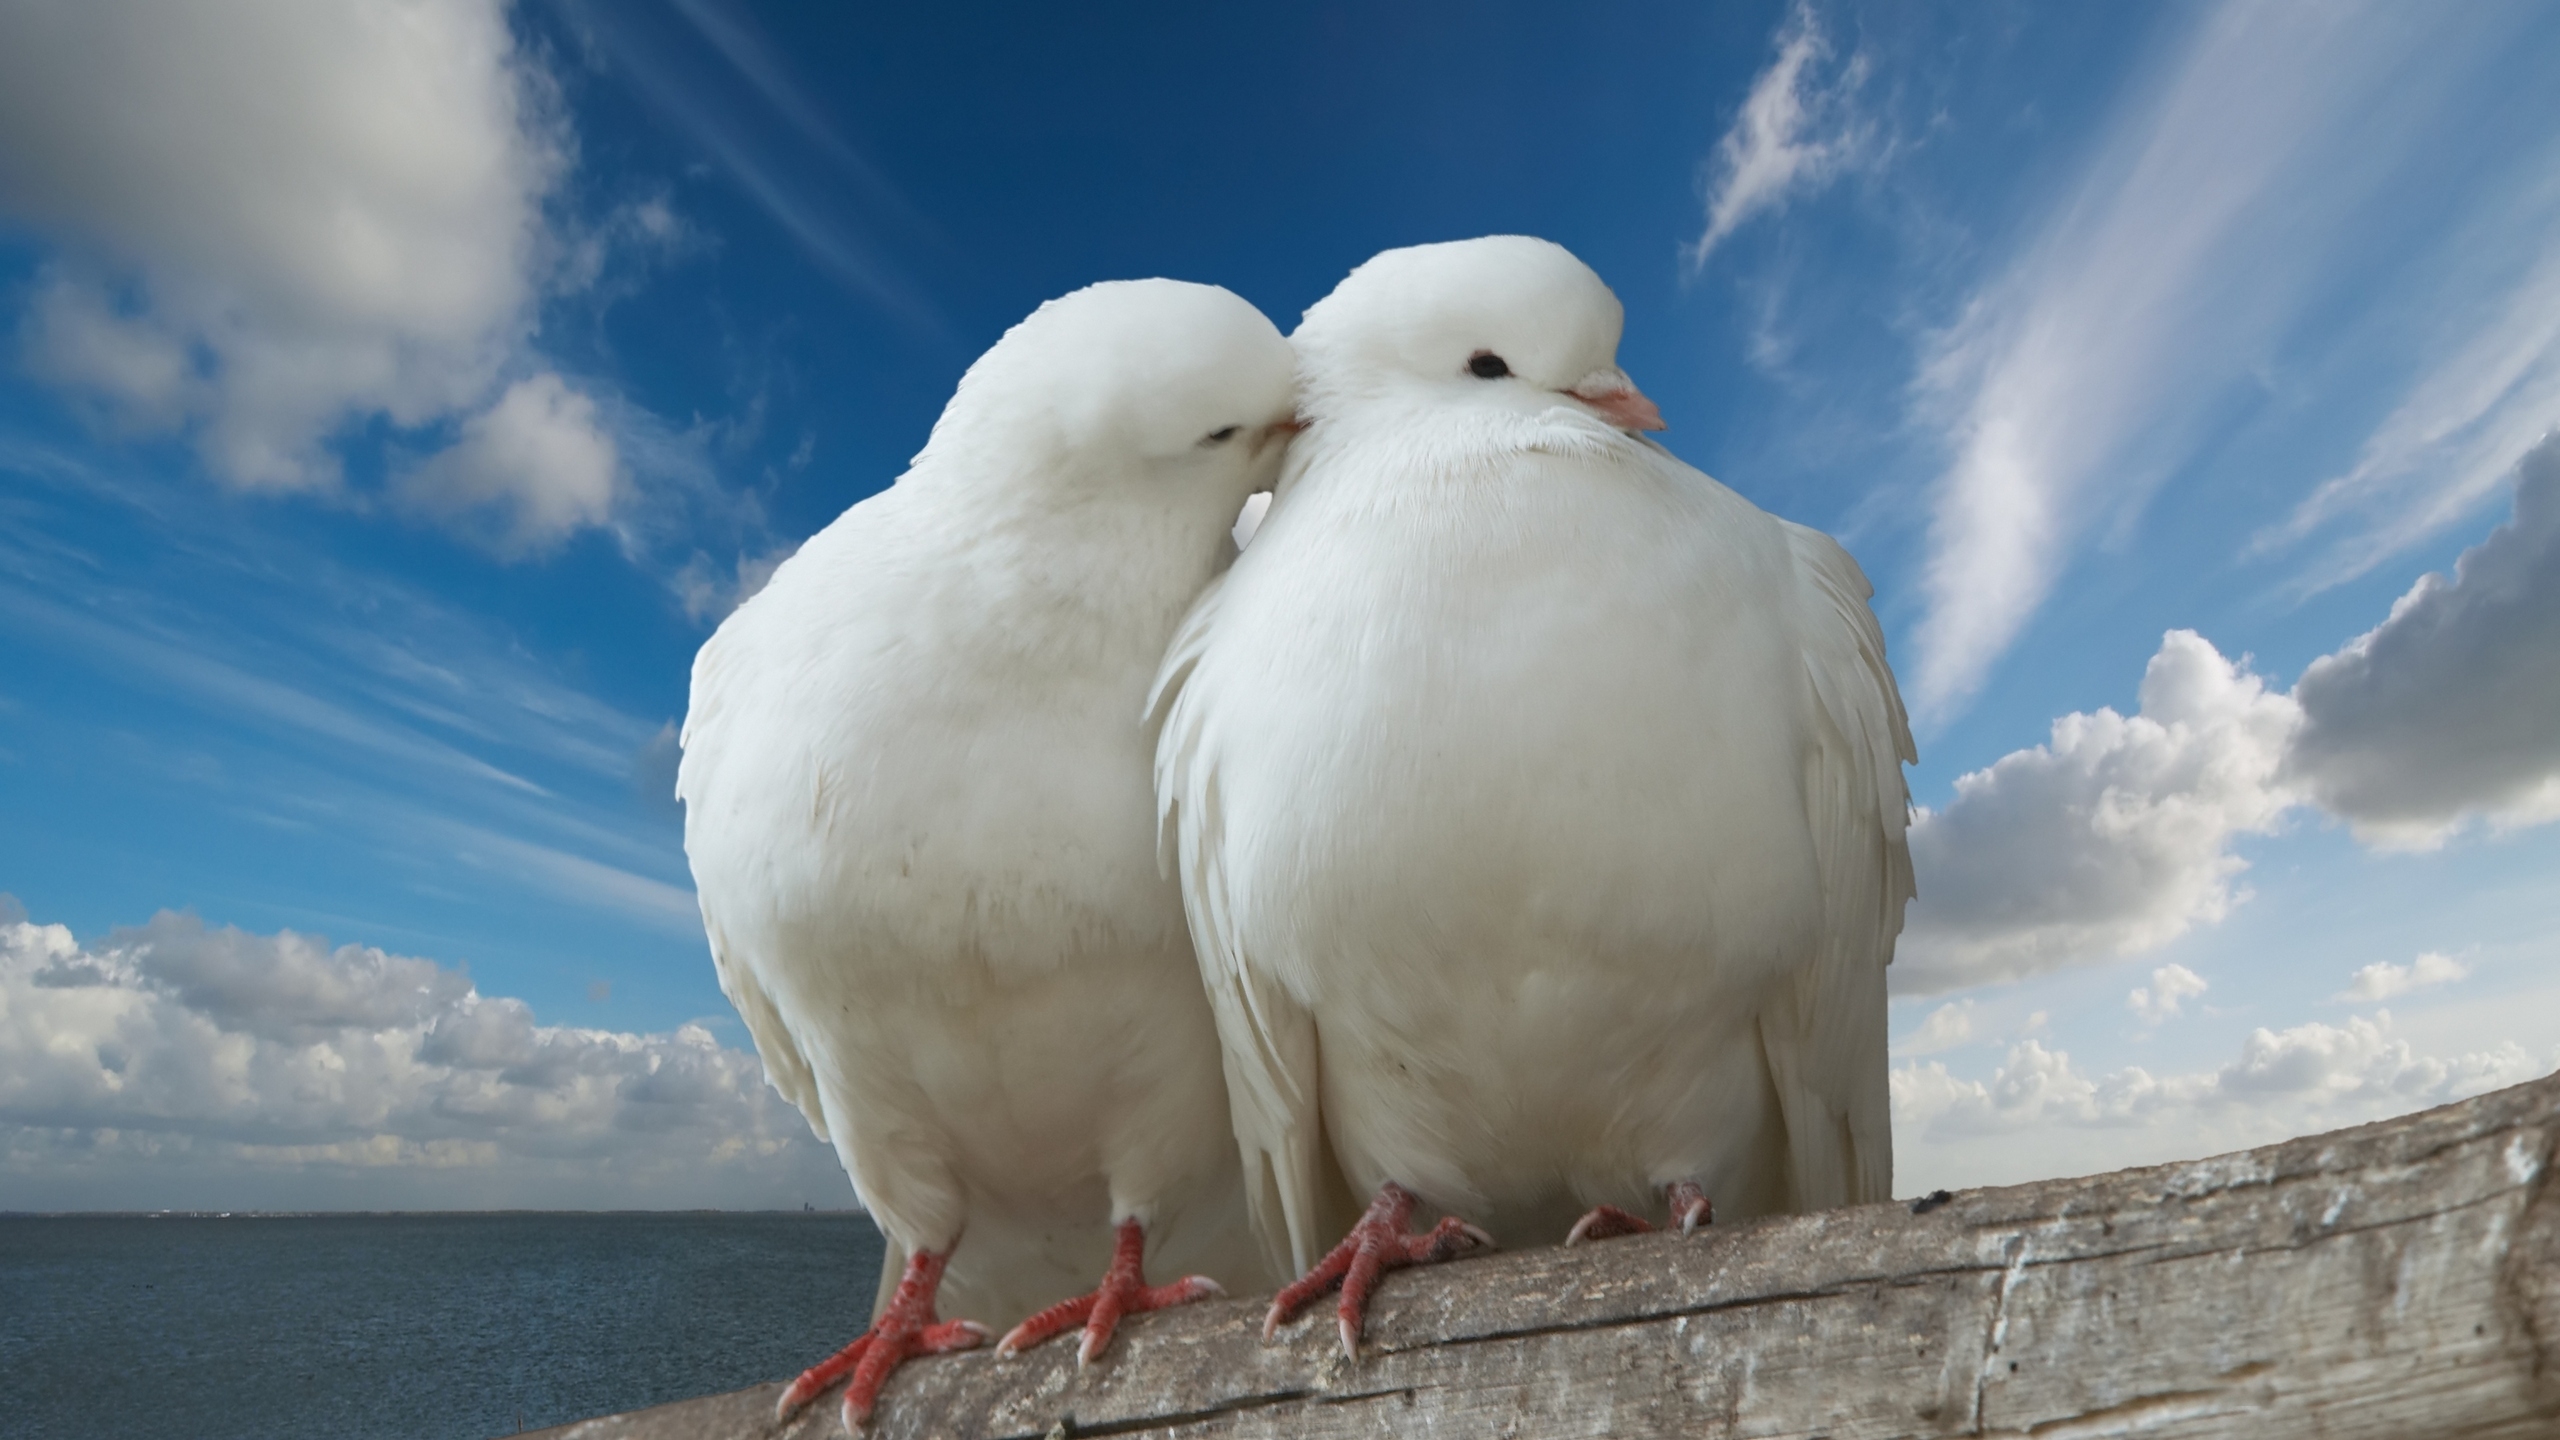 Pigeons in Love for 2560x1440 HDTV resolution